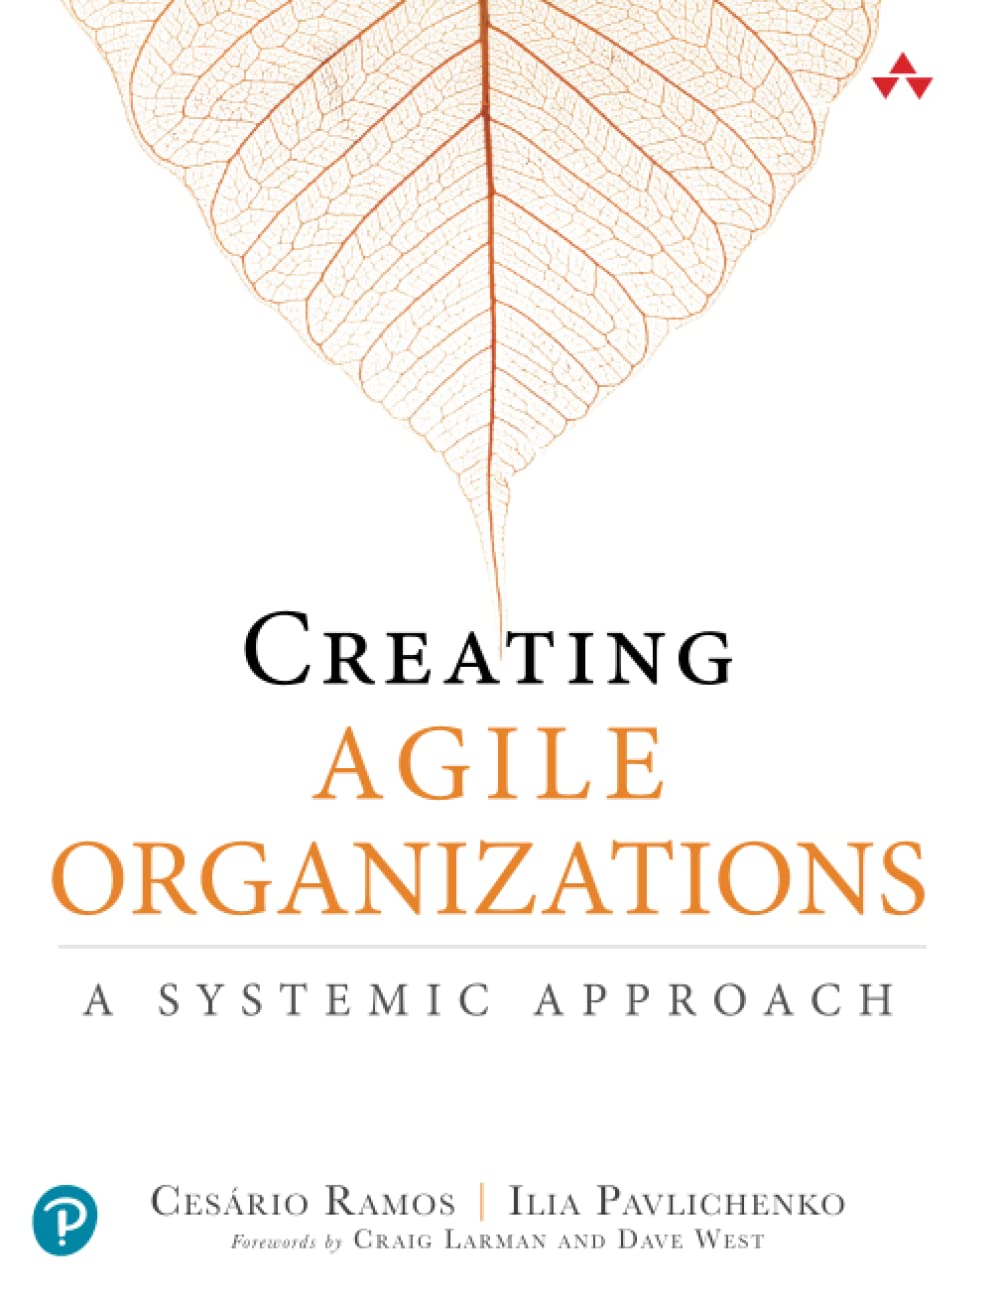 Creating Agile Organizations: A Systemic Approach by Cesario Ramos 